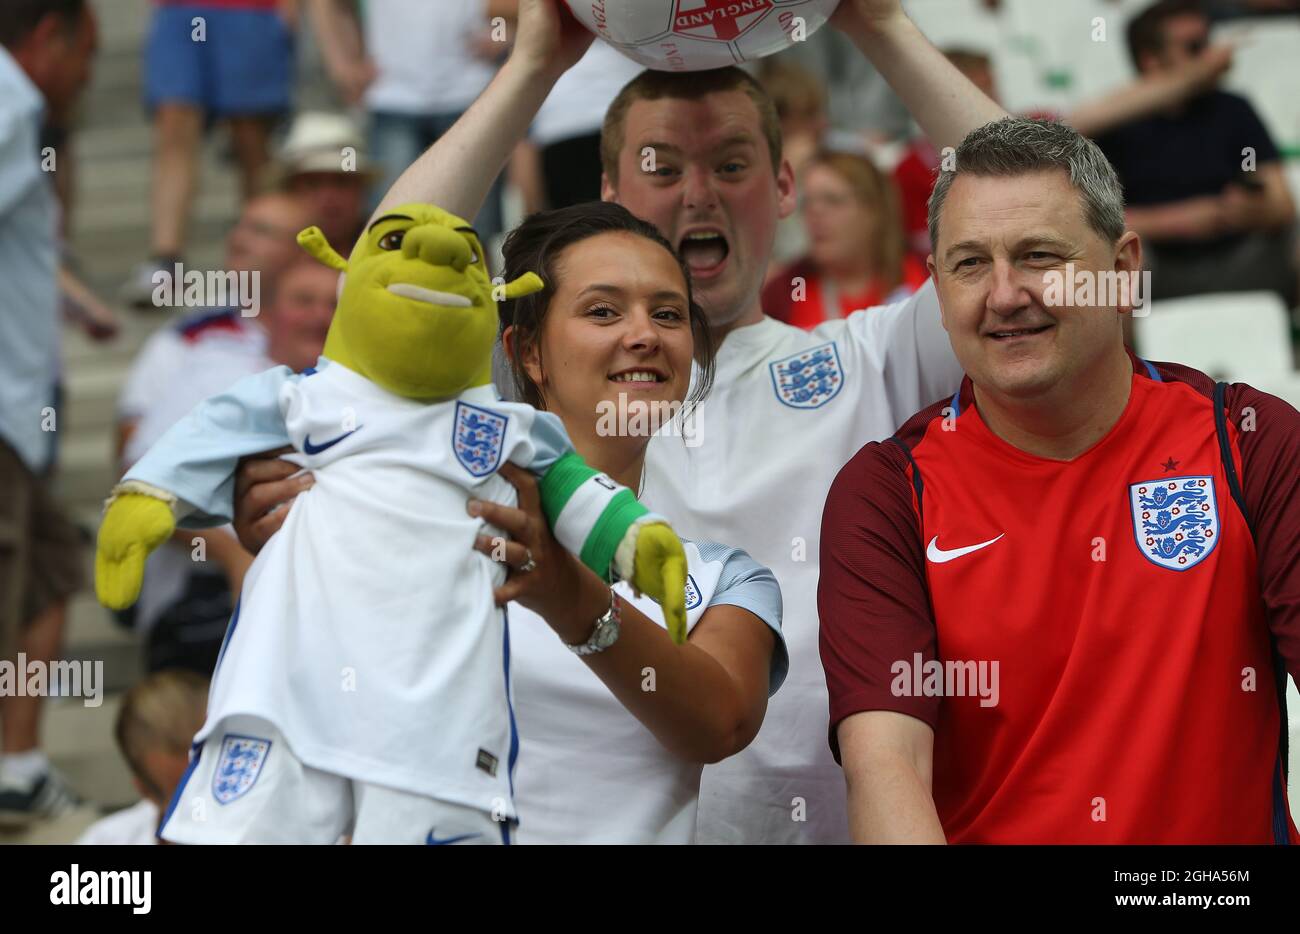 A Wayne Rooney "shrek" mascot held up before the UEFA European Championship 2016 match at the Stade Geoffroy-Guichard, St Etienne. Picture date June 20th, 2016 Pic Phil Oldham/Sportimage via PA Images Stock Photo